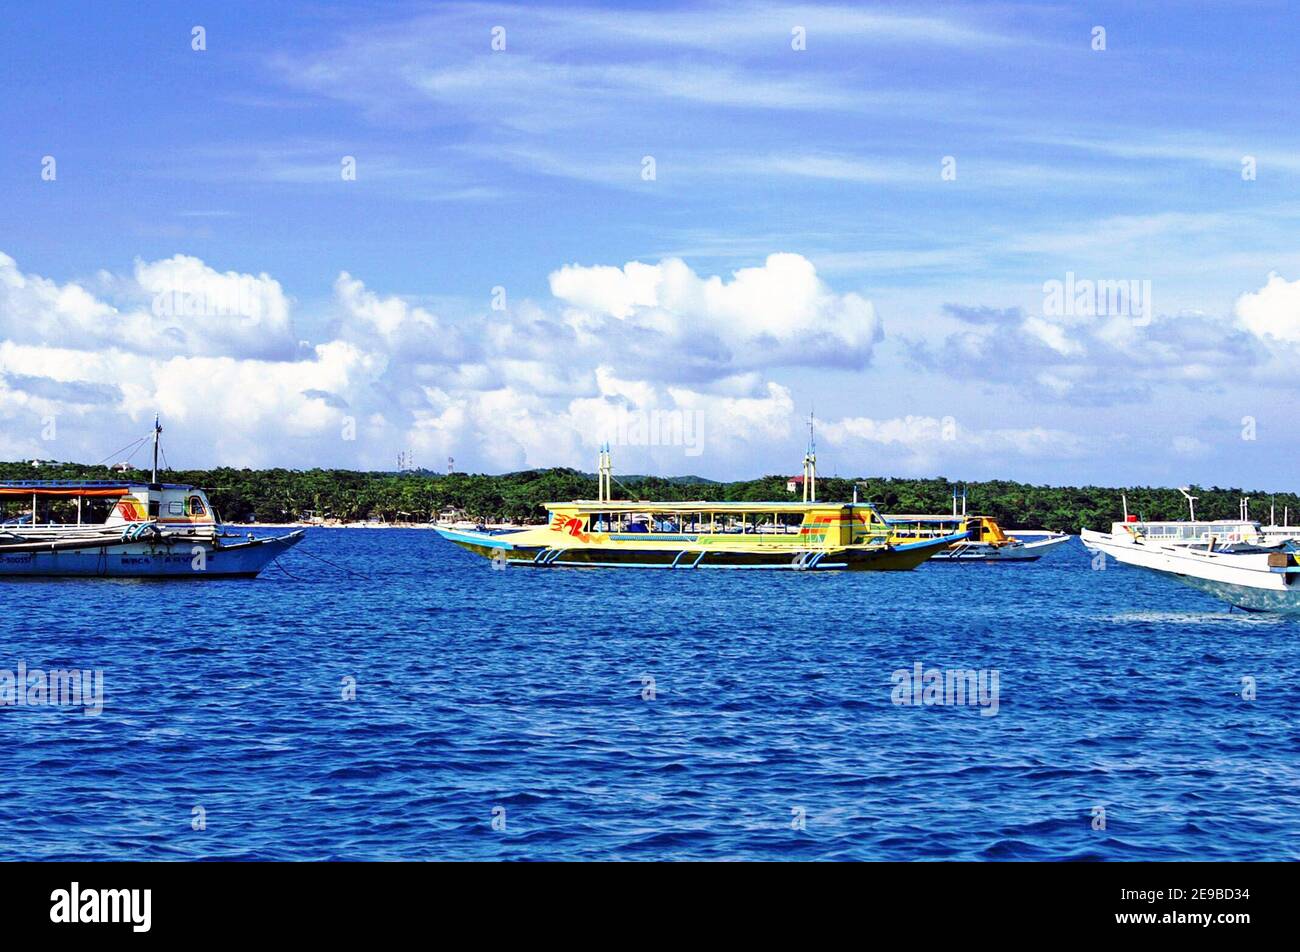 Boat and ferry traffic fills the waters near the Caticlan Jittney Port, the main departure/arrival for people visiting the resort island of Boracay, Philippines.  Taken in 2005, signs of unsustainable tourism were appearing such as transportation congestion contributing to water pollution.  In 2018 the government closed down the entire island of Boracay due to its degradation and pursued a rehabilitation and recovery plan based on sustainable tourism models.  The quantity of seacraft transportation to and from the island has impacts on the environment as well as the island carrying capacity. Stock Photo